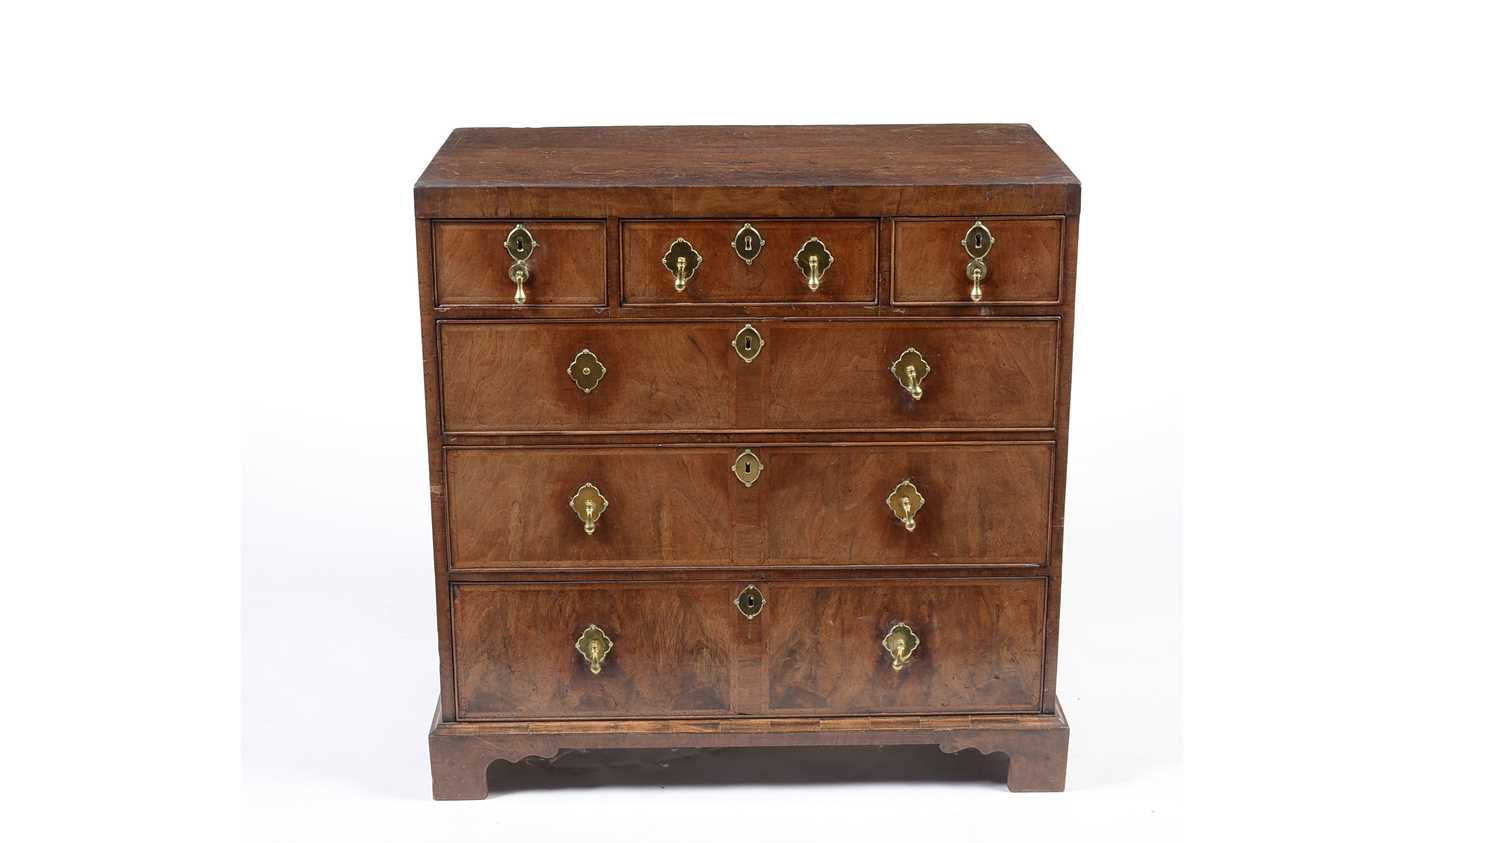 A 18th Century walnut and oak chest of drawers